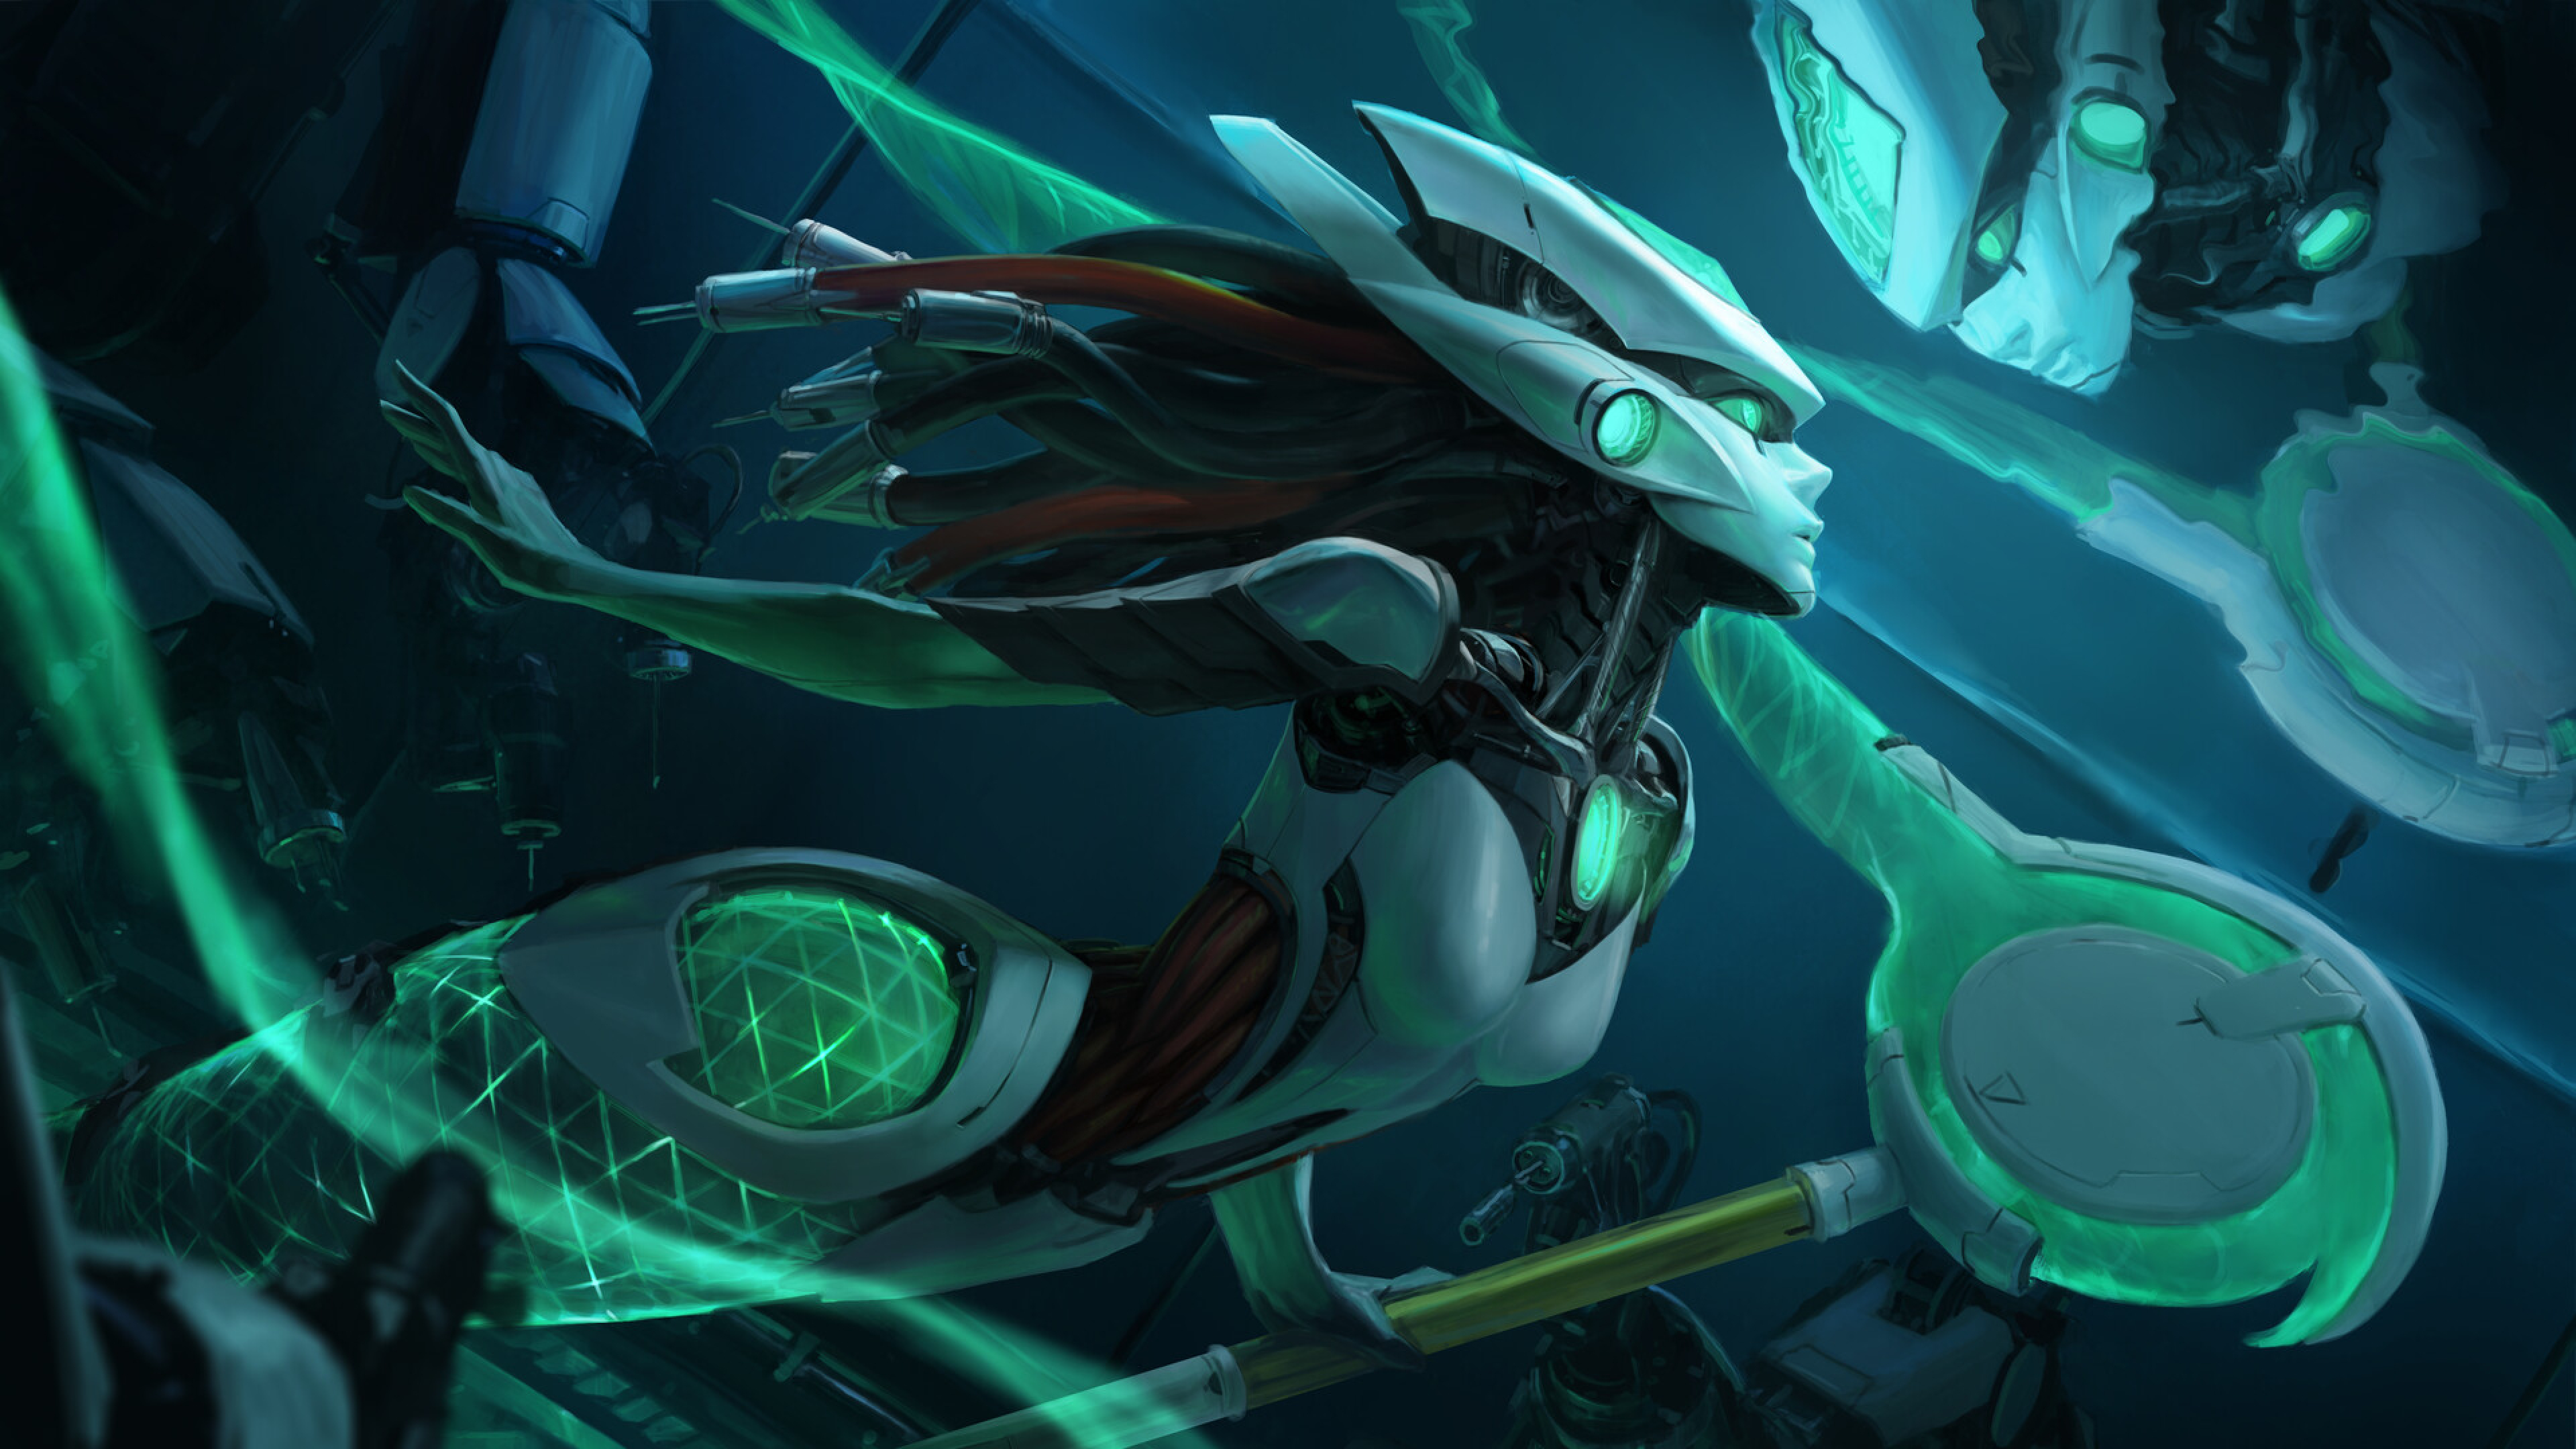 3840x2160 Nami League Of Legends 4k Wallpaper Hd Games 4k Wallpapers Images Photos And Background